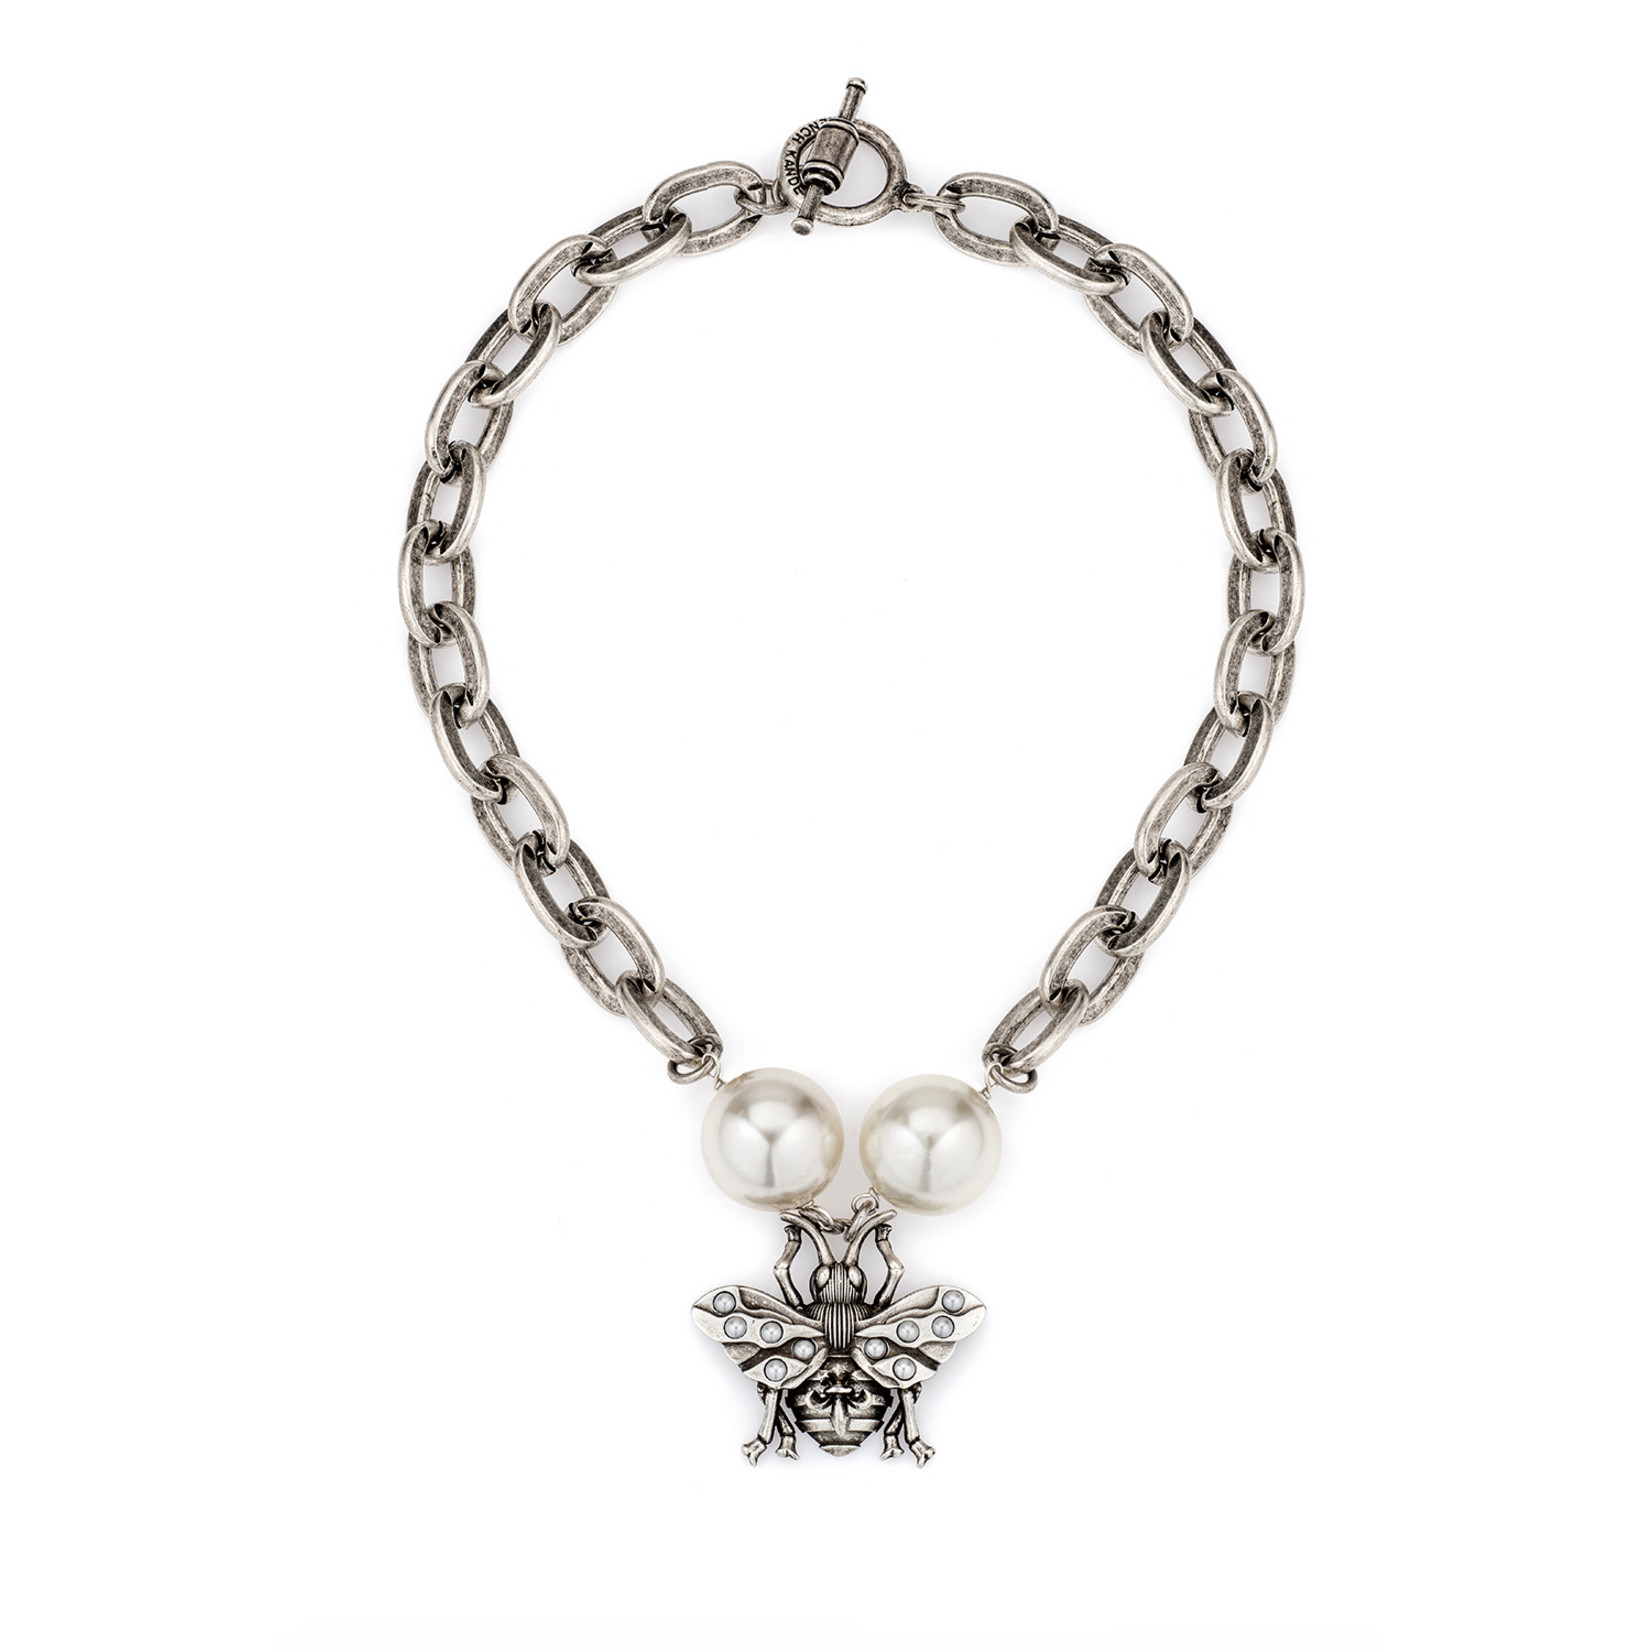 French Kande Lourdes Chain with Pearl + Bee Pendant